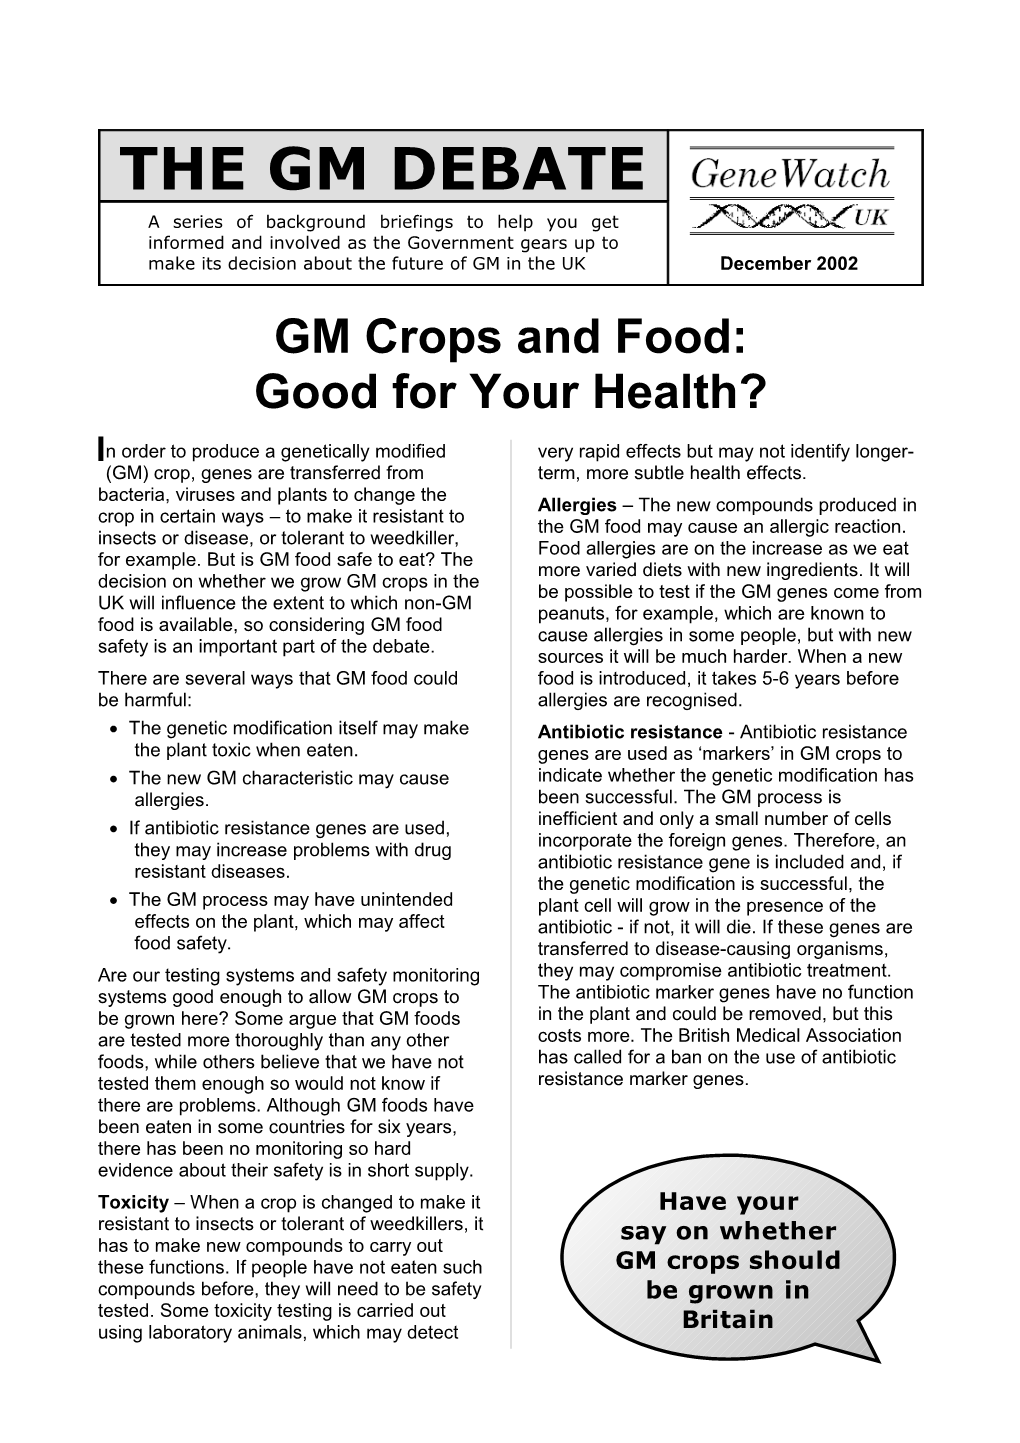 GM Crops And Food - Good For Your Health?